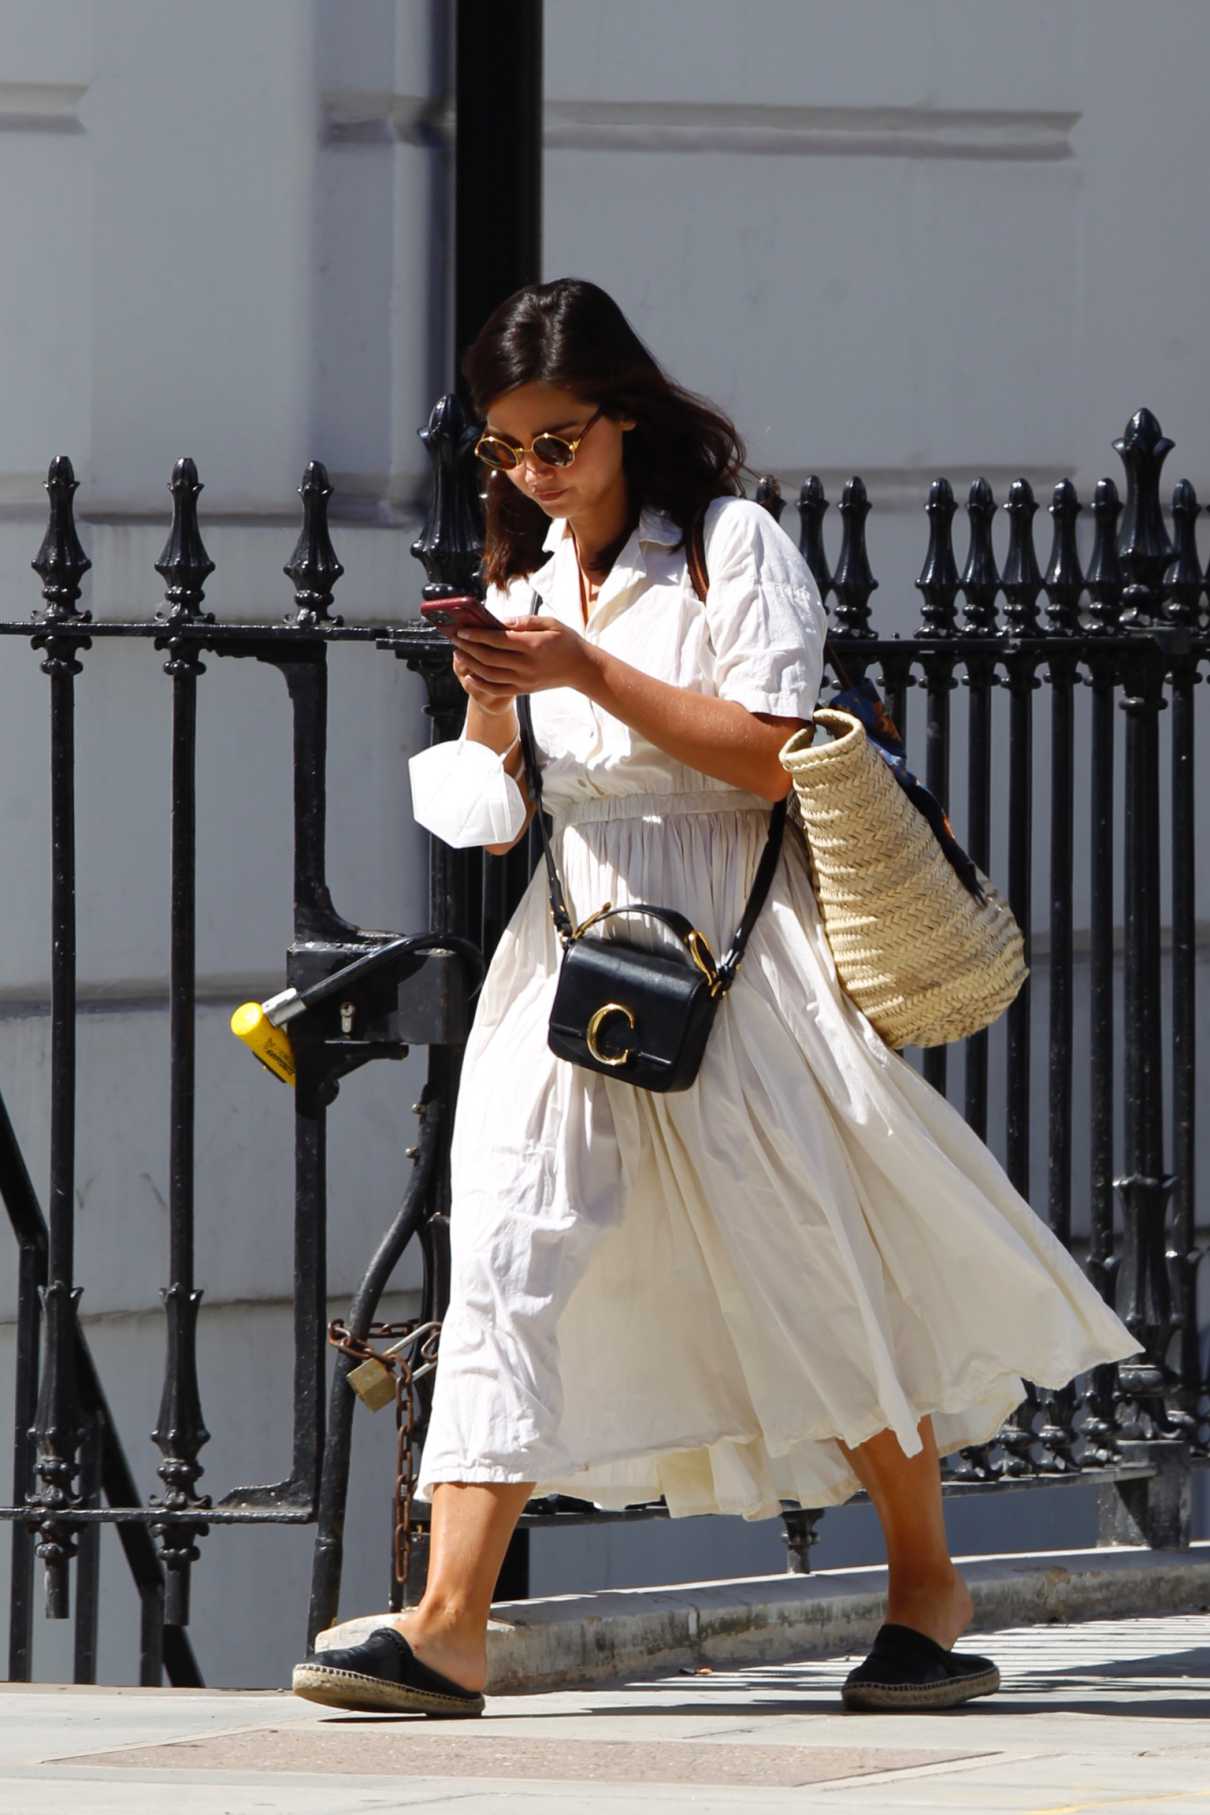 Jenna Coleman in a White Skirt